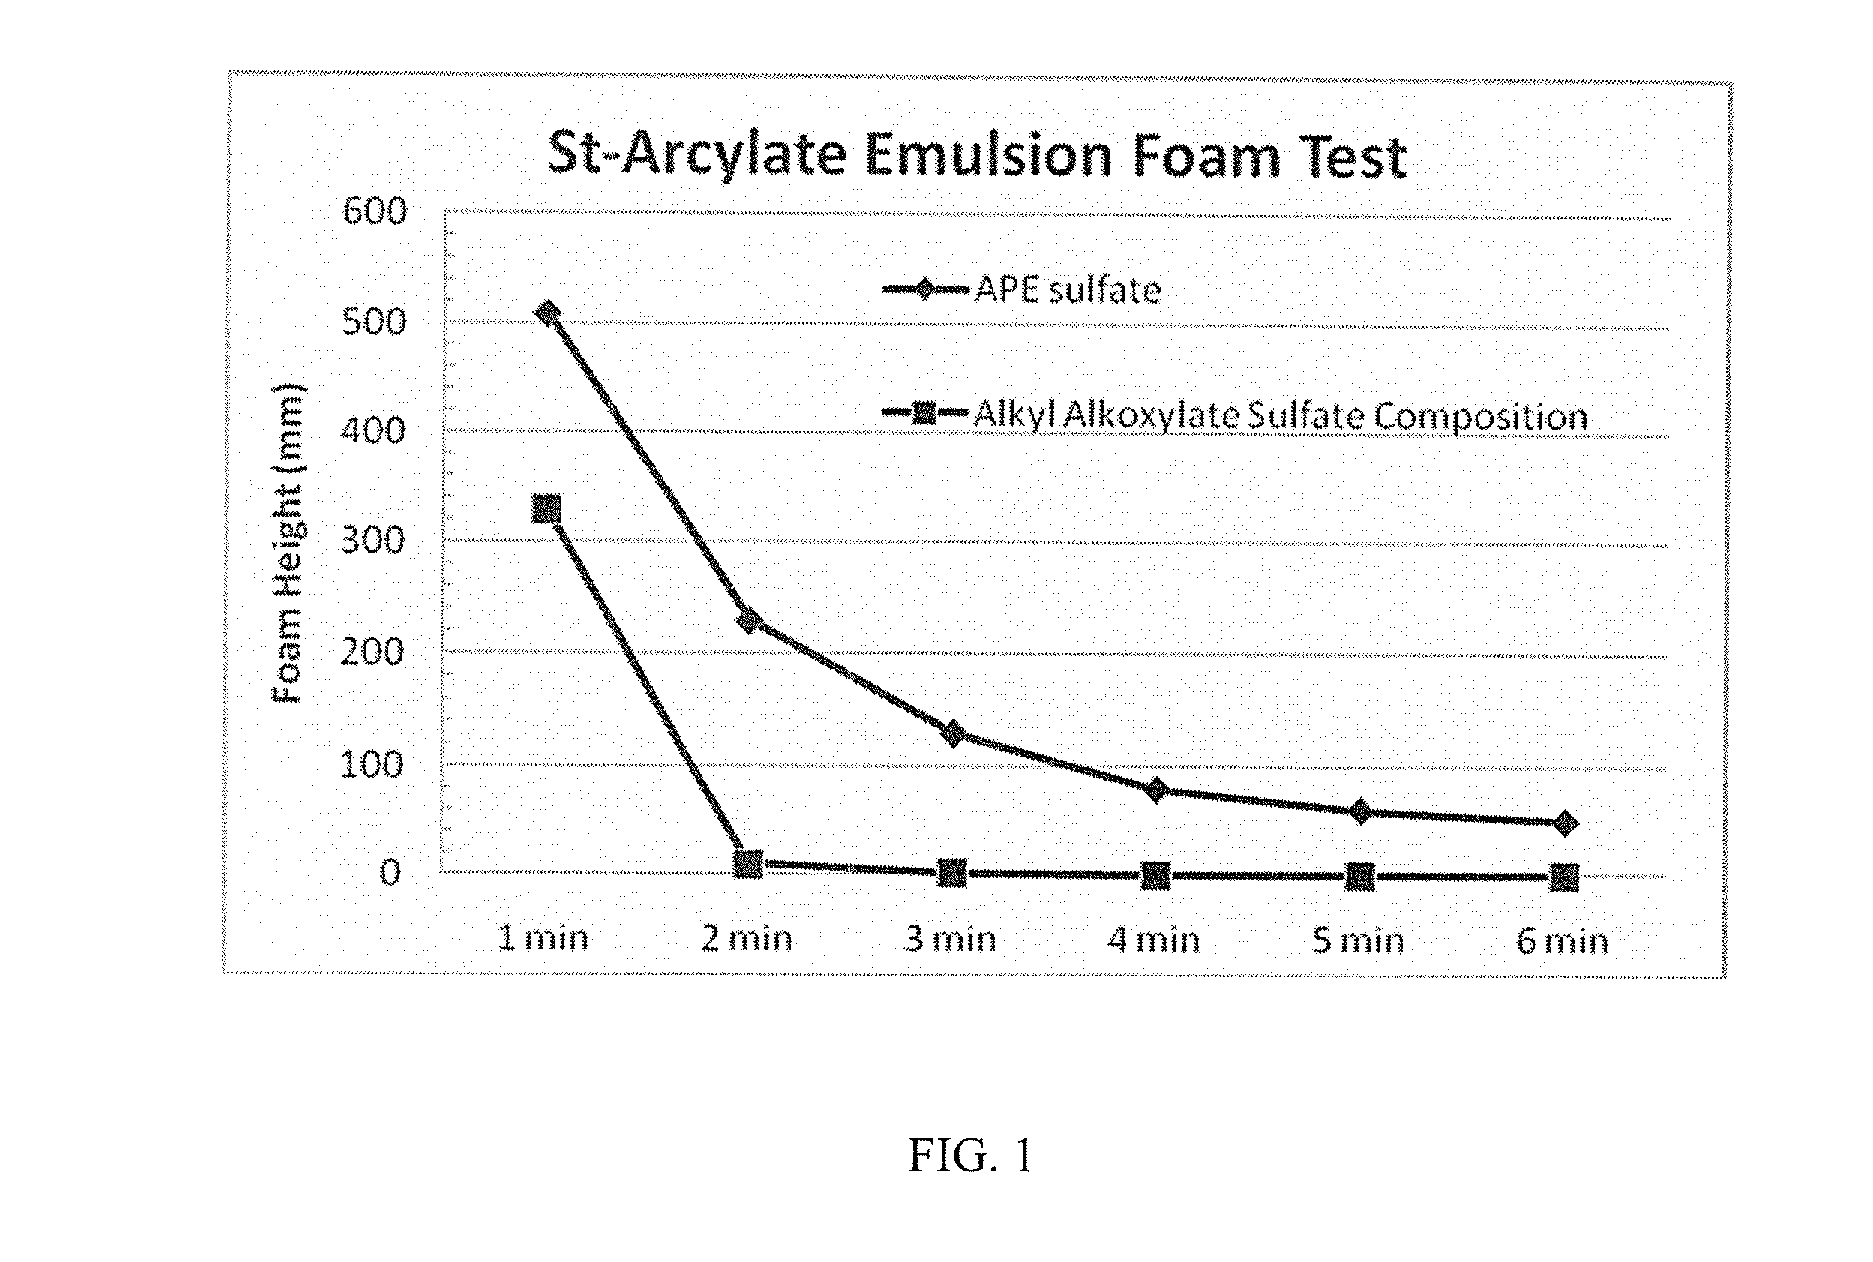 Anionic surfactant compositions and use thereof